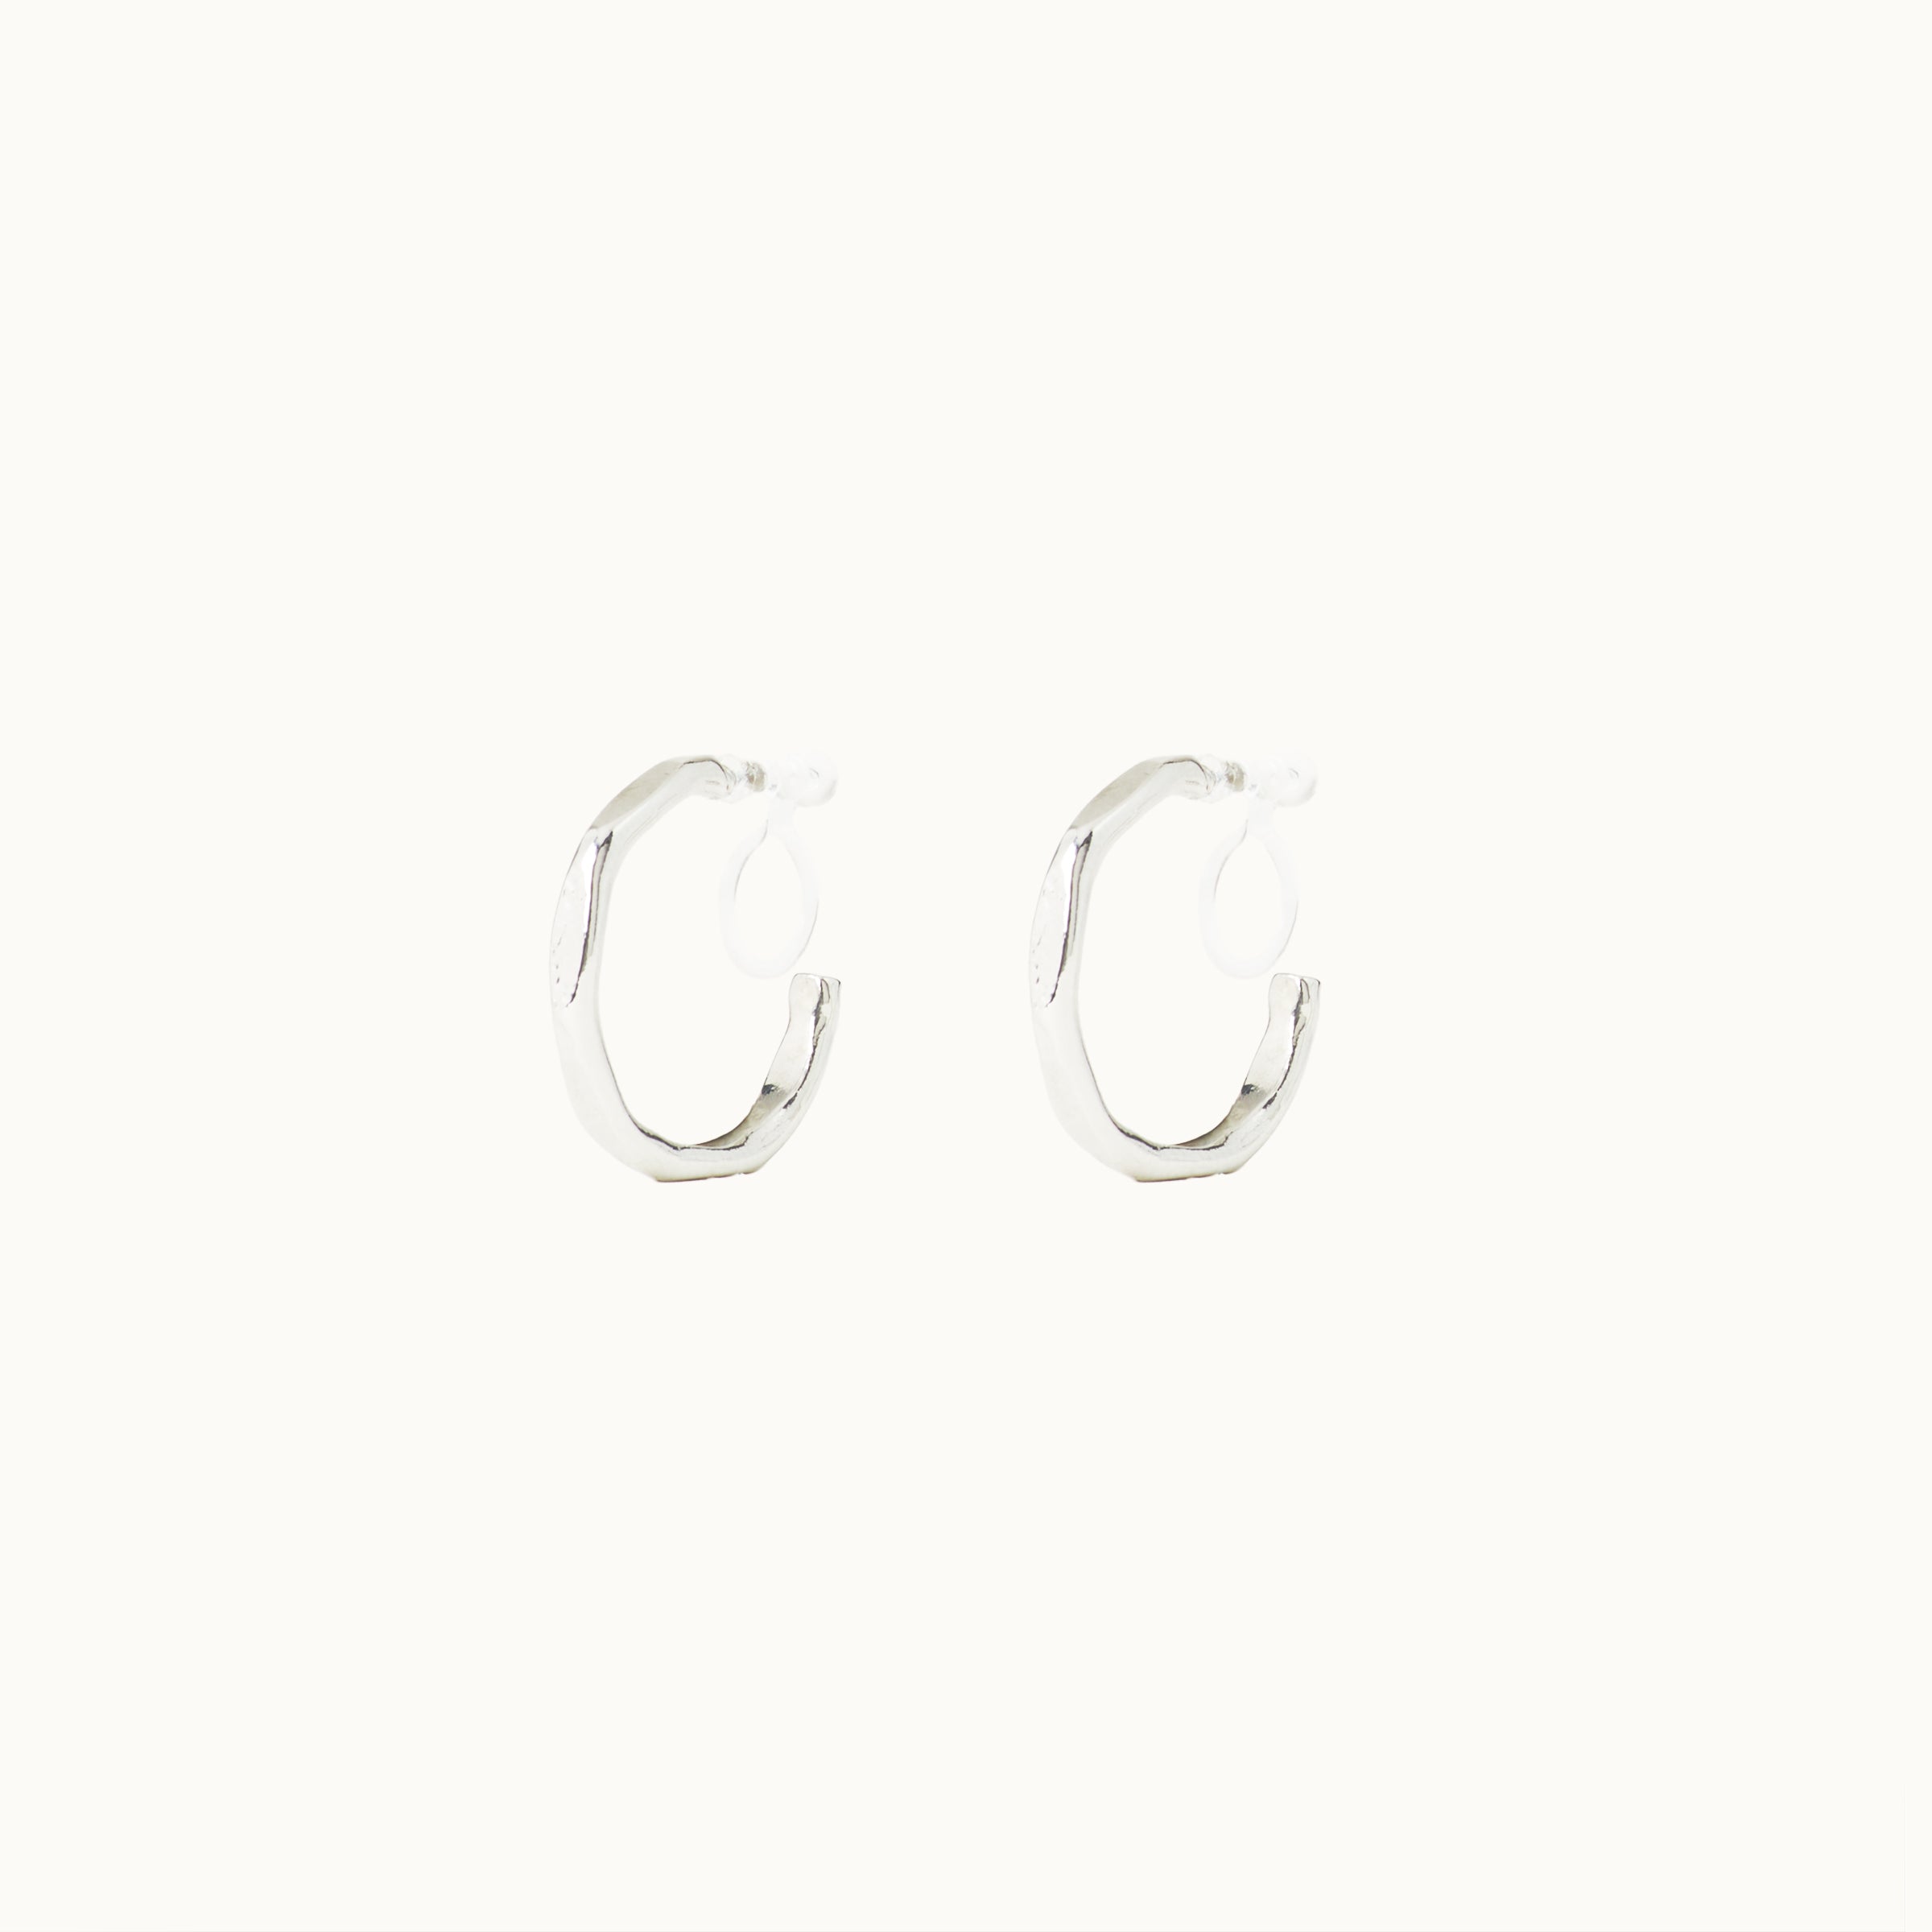 Image of the Smith Hoop Clip On Earrings in Silver, perfect for all ear sizes. With a resin clip-on closure and medium secure hold, these earrings provide comfort for 8-12 hours. Whether you have thick, large, or sensitive ears, these earrings are a must-have! Note: No adjustments possible and one pair only.